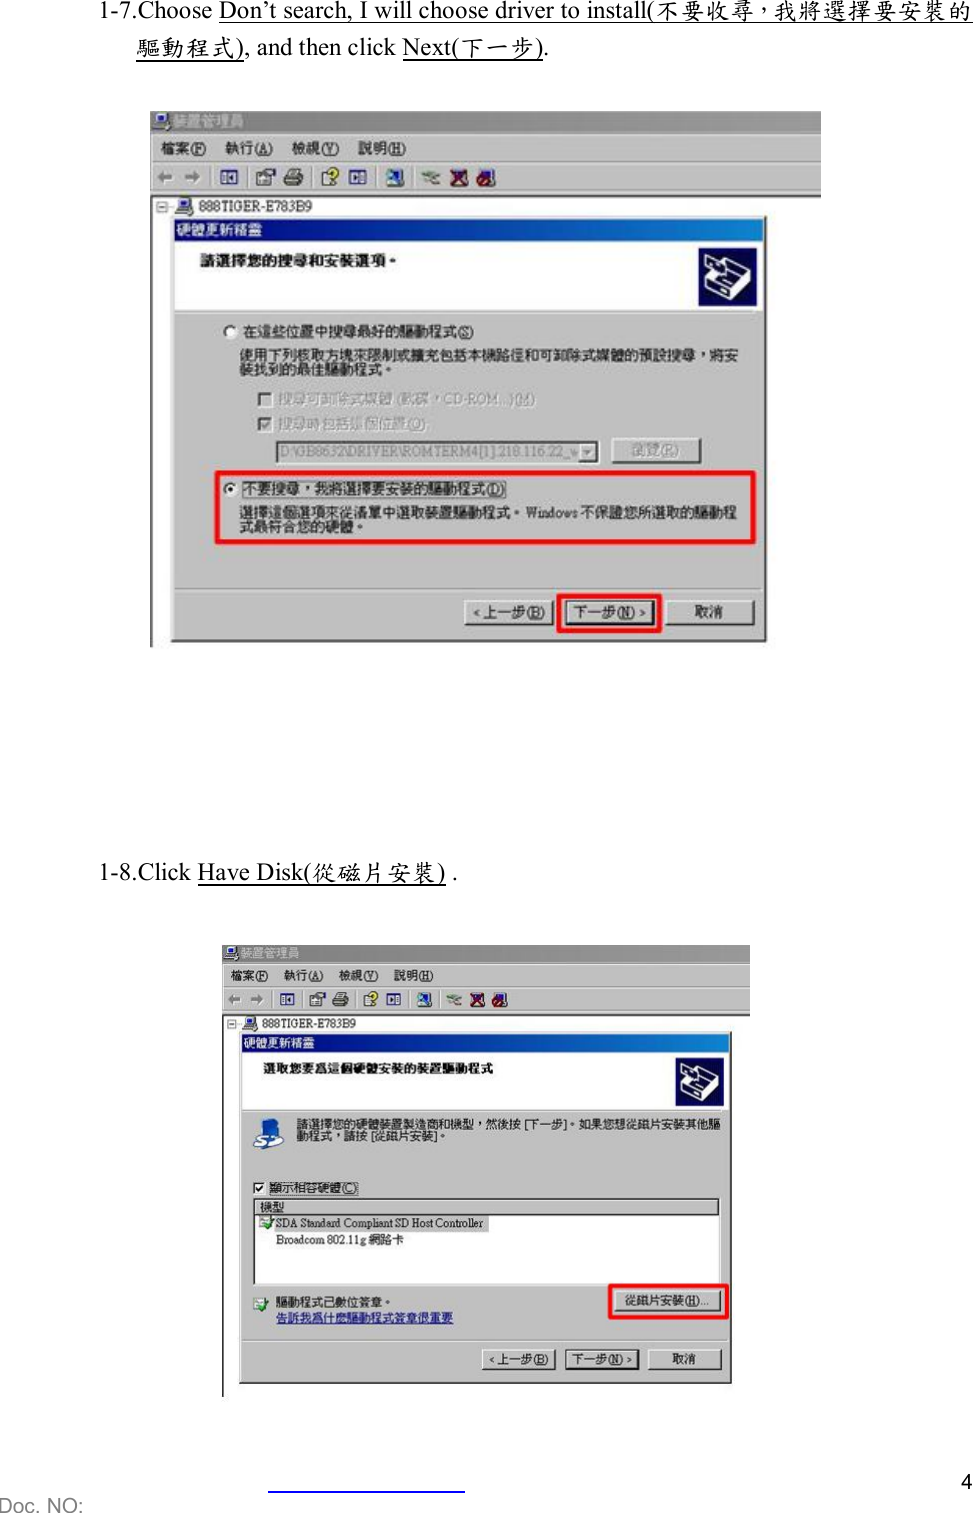    Doc. NO:   4  1-7.Choose Don’t search, I will choose driver to install(不要收尋，我將選擇要安裝的驅動程式), and then click Next(下一步).         1-8.Click Have Disk(從磁片安裝)  .    